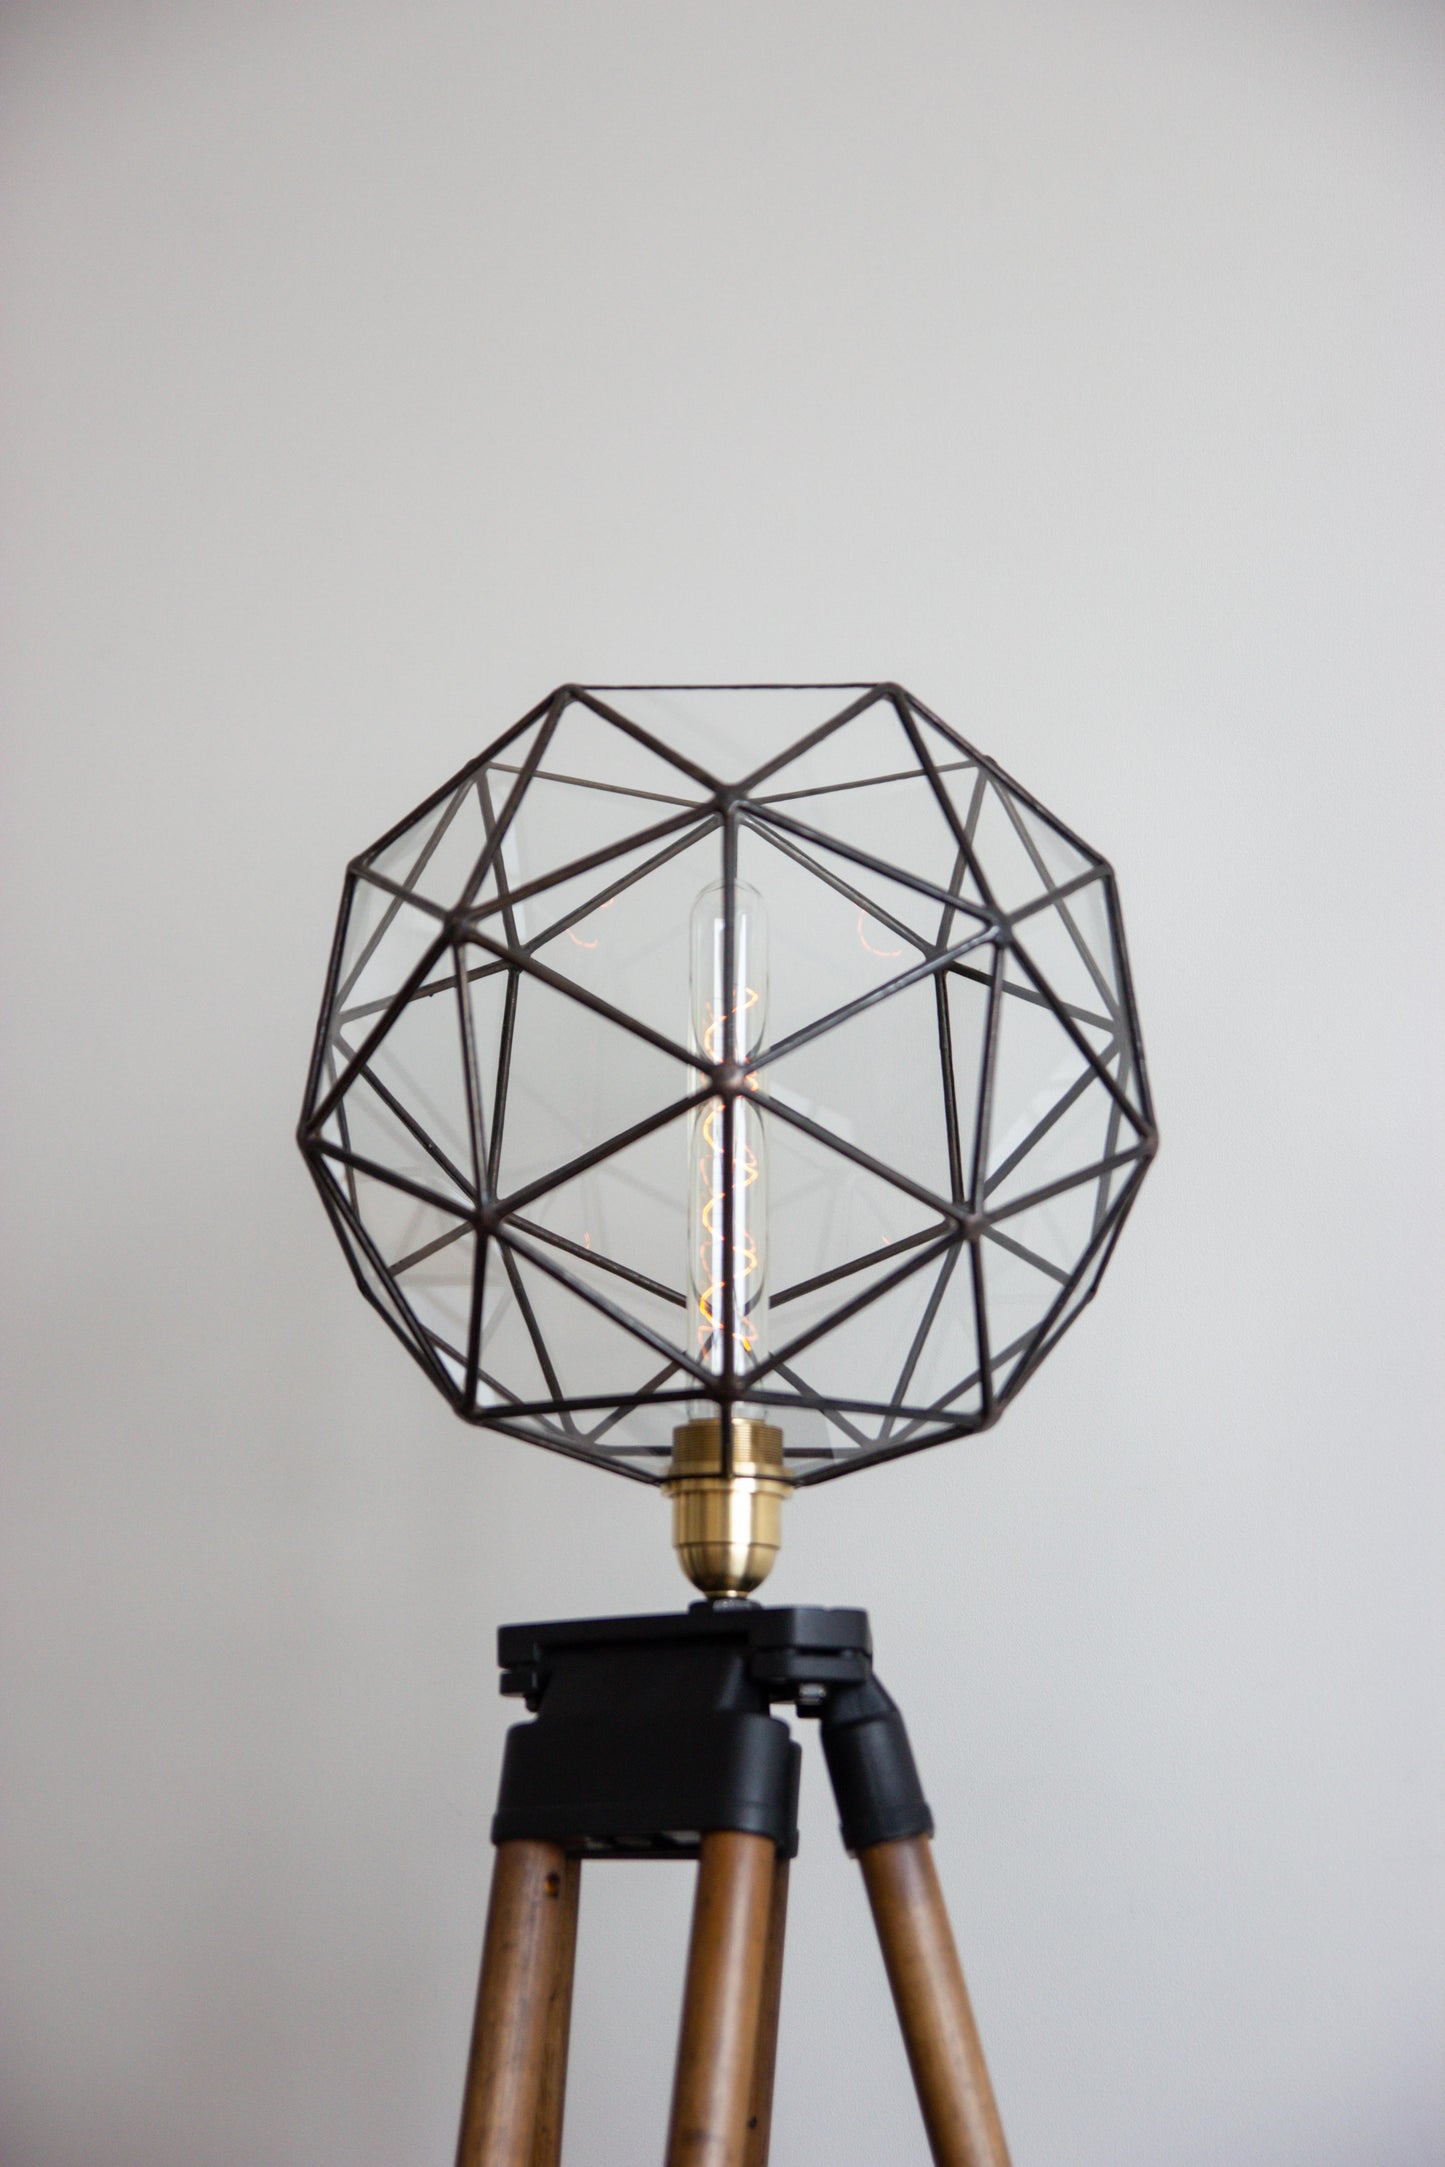 Old Wood Tripod With Glass Geometric With Pentakis Dodecahedron